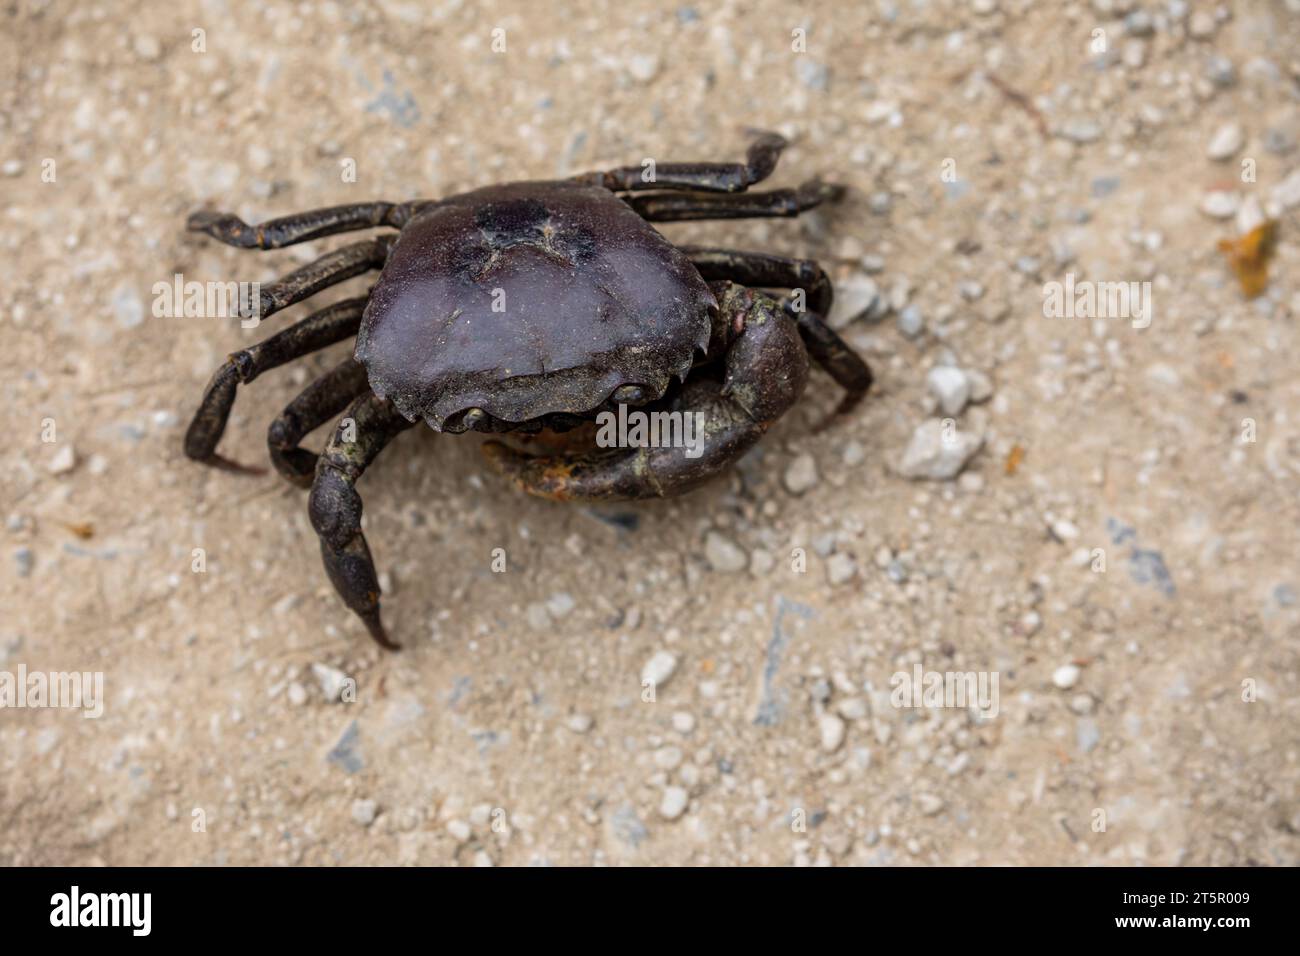 A Crab from the Forest in Vietnam Stock Photo